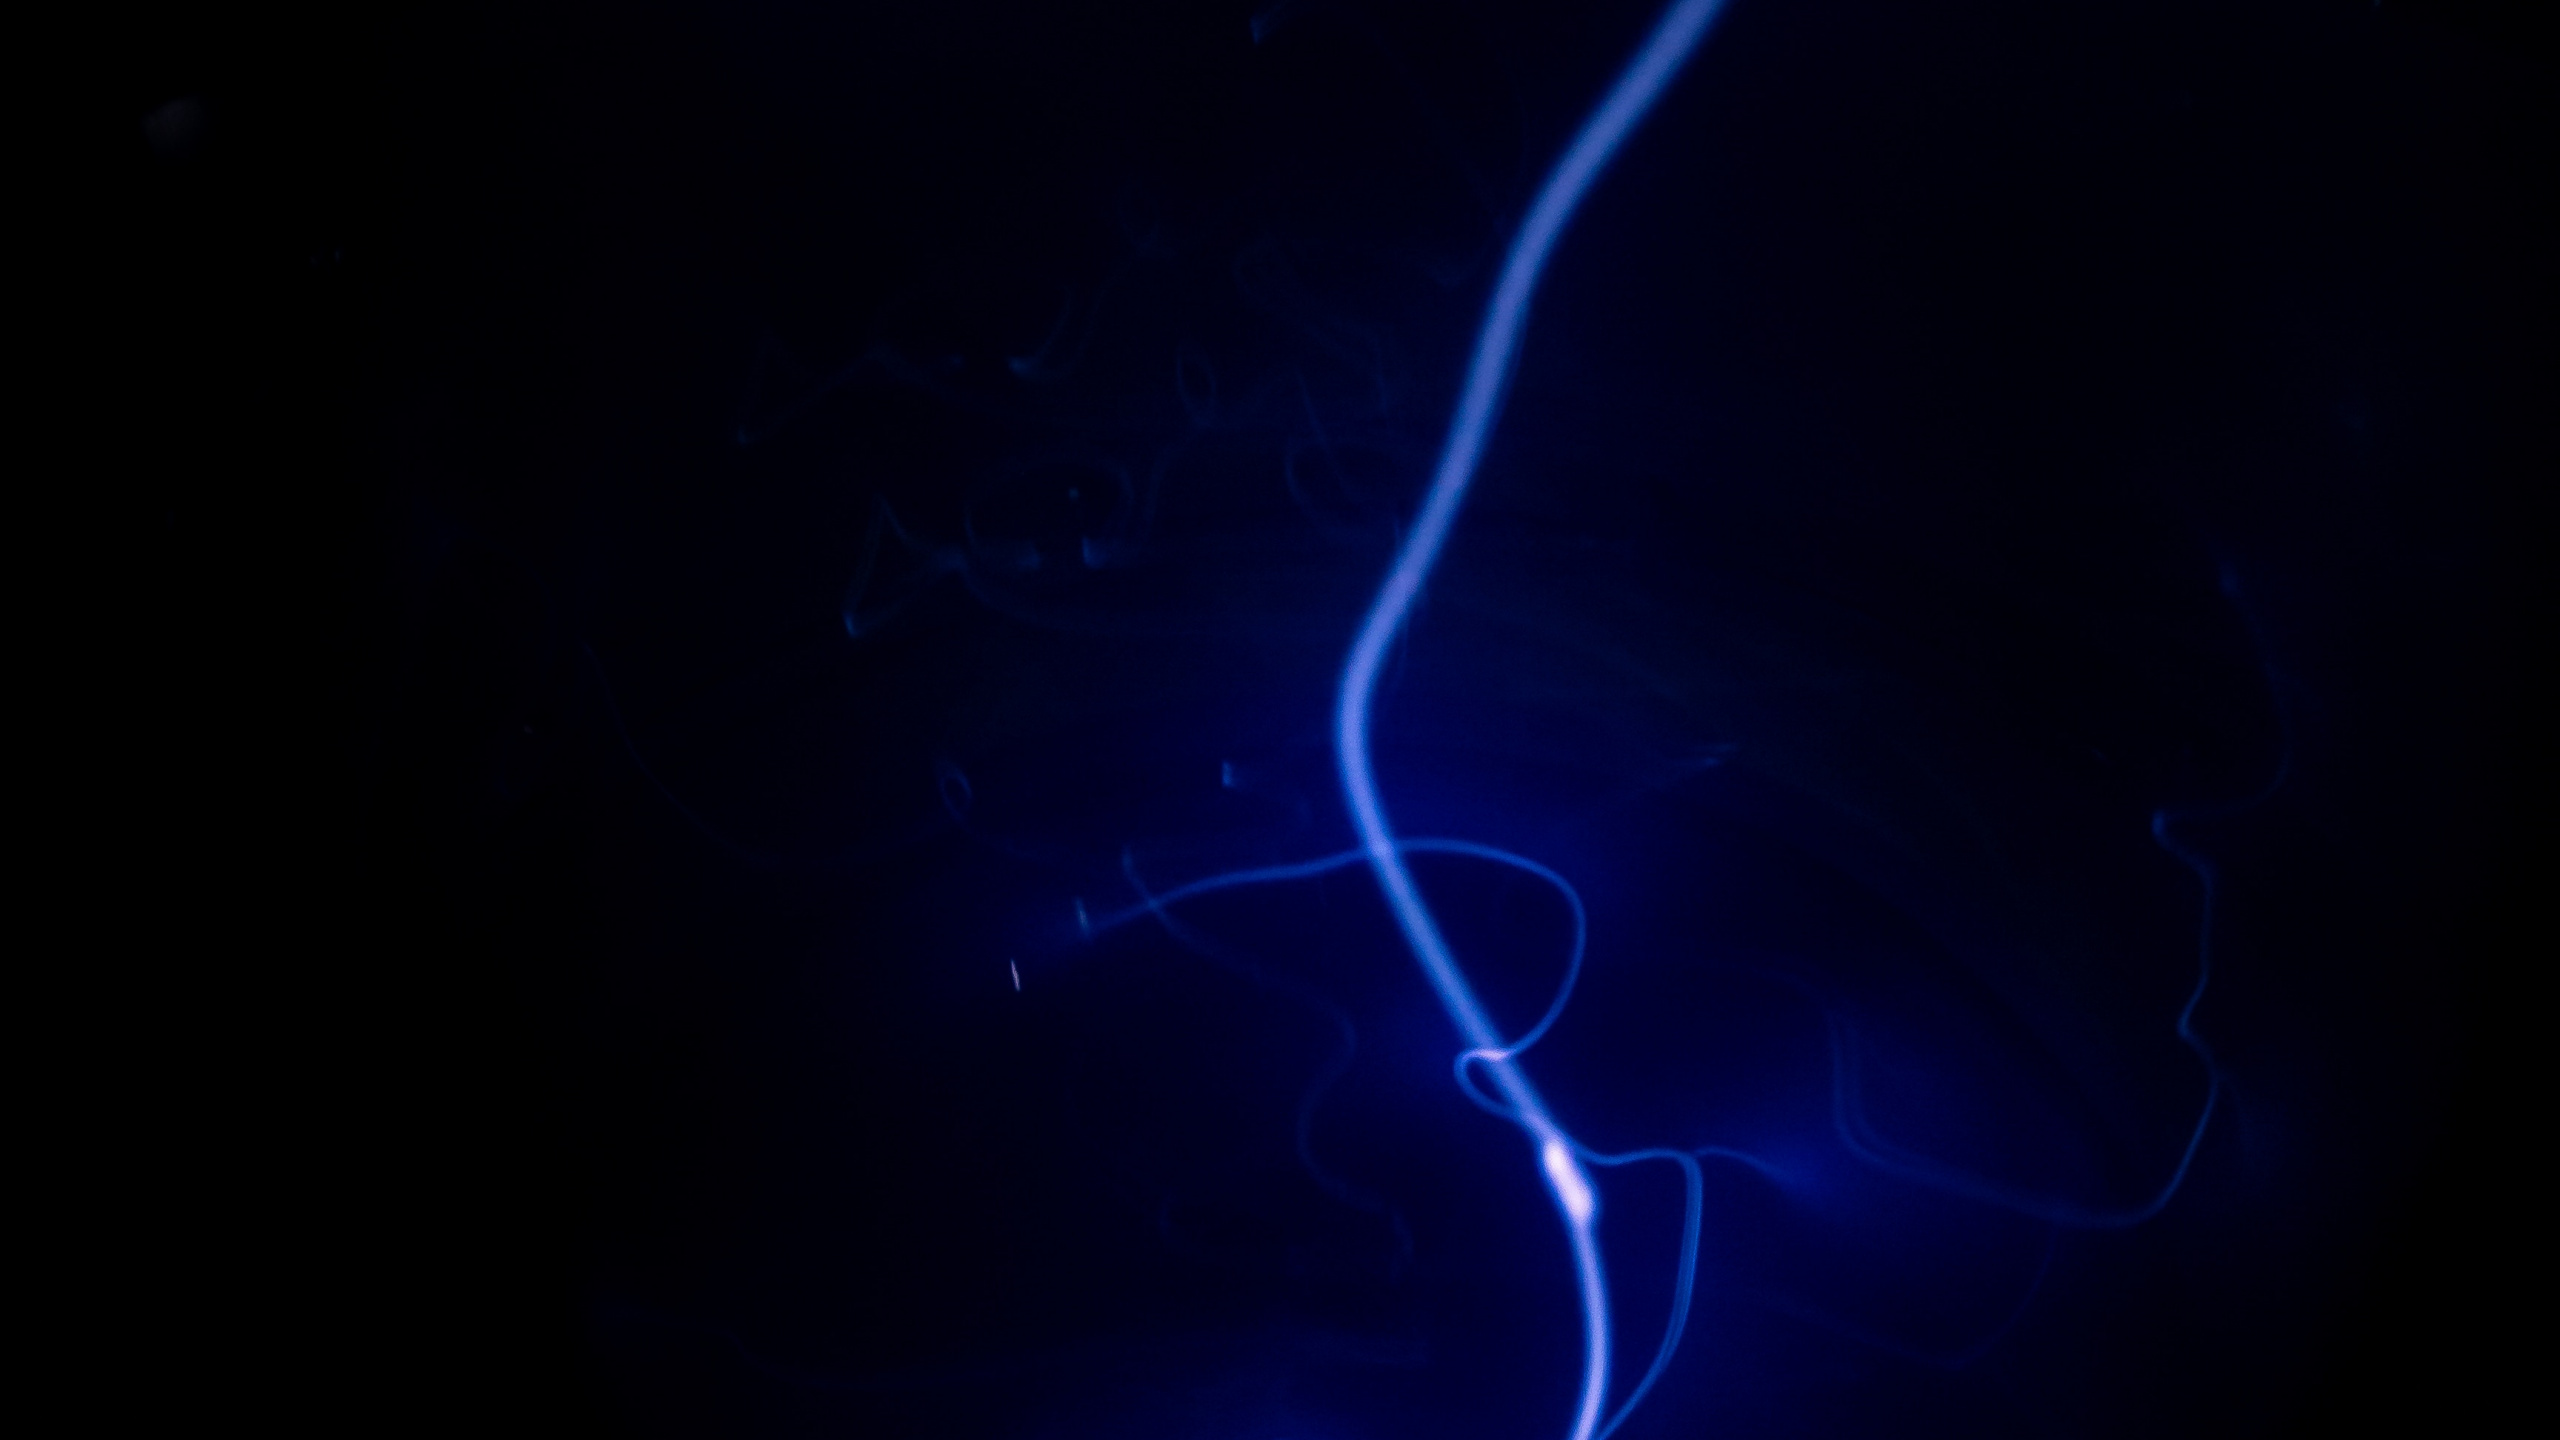 Blue and White Light Illustration. Wallpaper in 2560x1440 Resolution